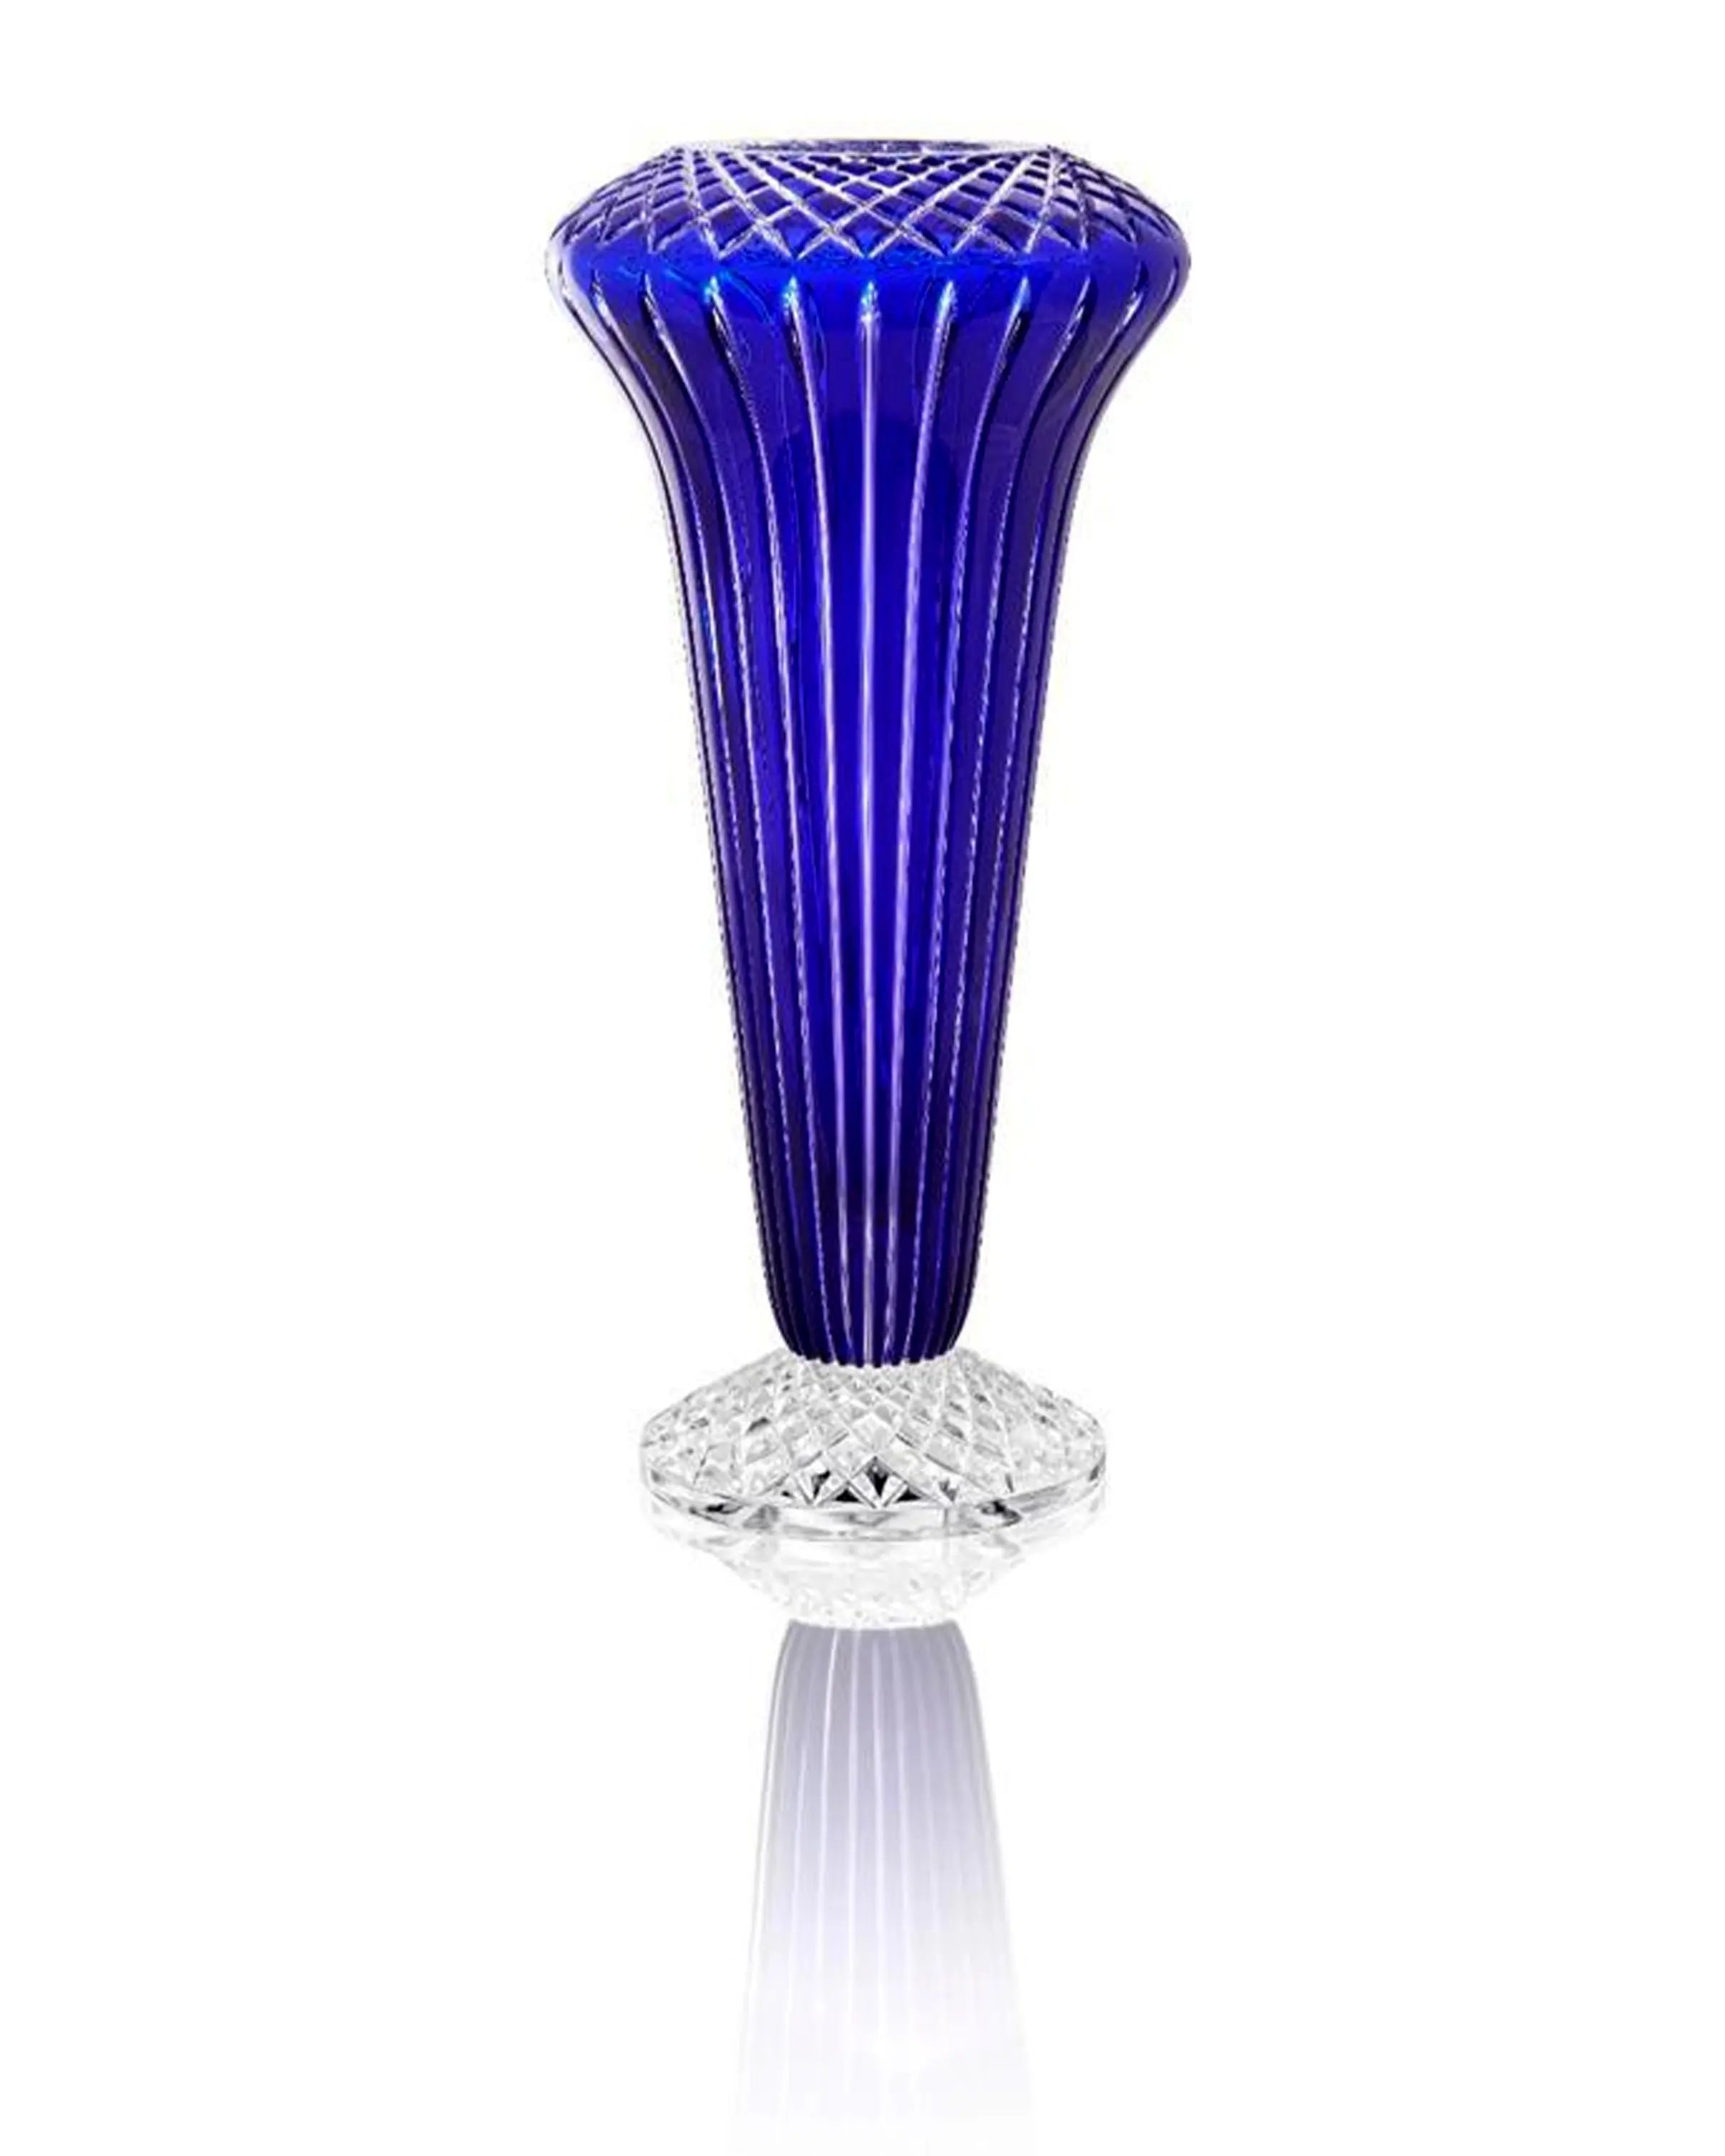 Exquisite Crystal and Flower Vases